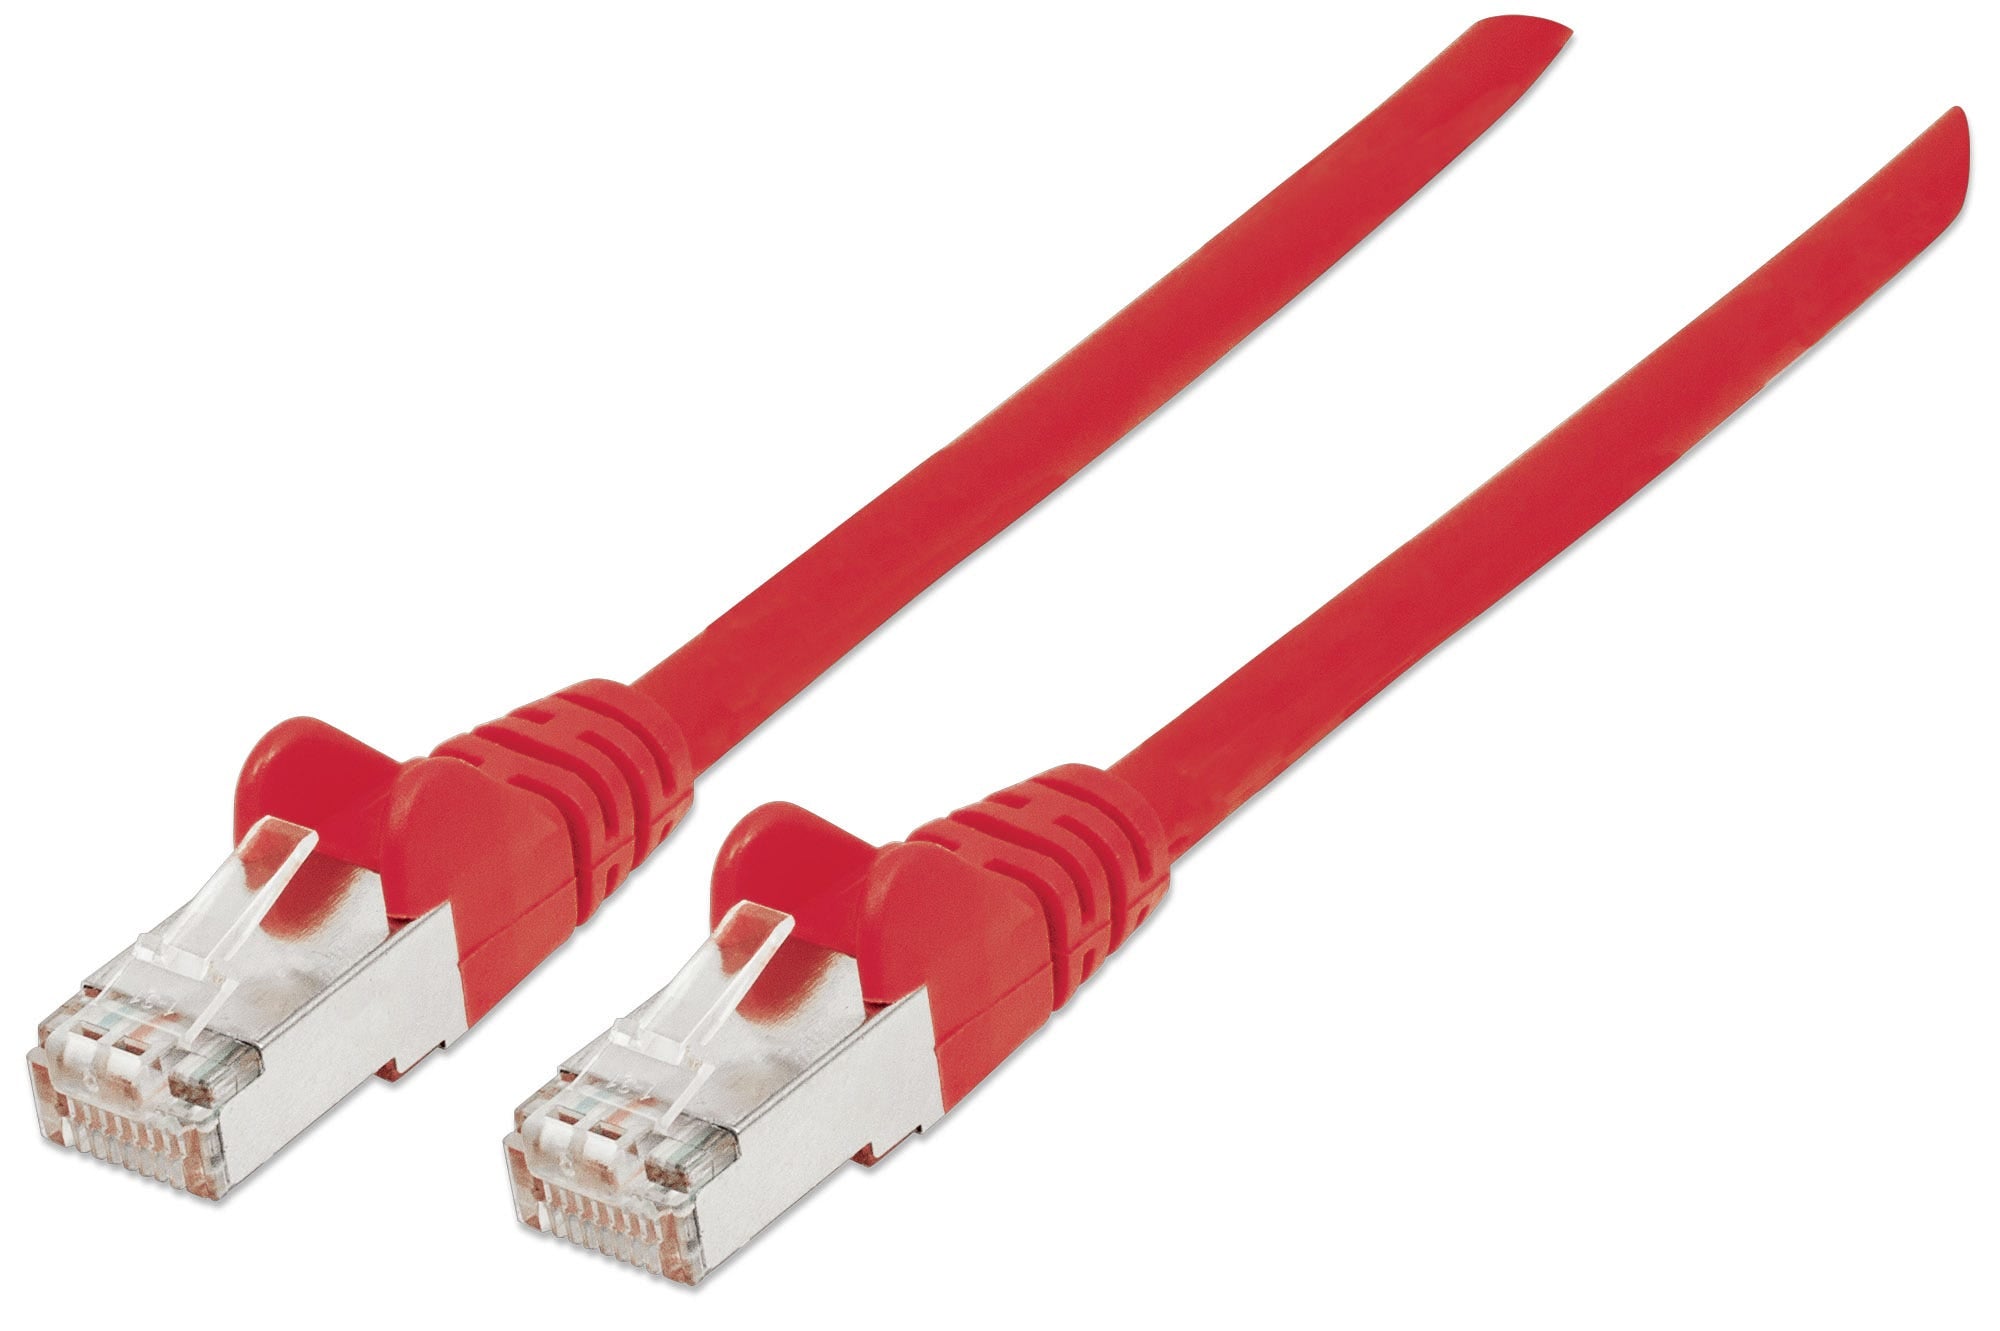 Intellinet Network Patch Cable, Cat6, 2m, Red, Copper, S/FTP, LSOH / LSZH, PVC, RJ45, Gold Plated Contacts, Snagless, Booted, Lifetime Warranty, Polybag